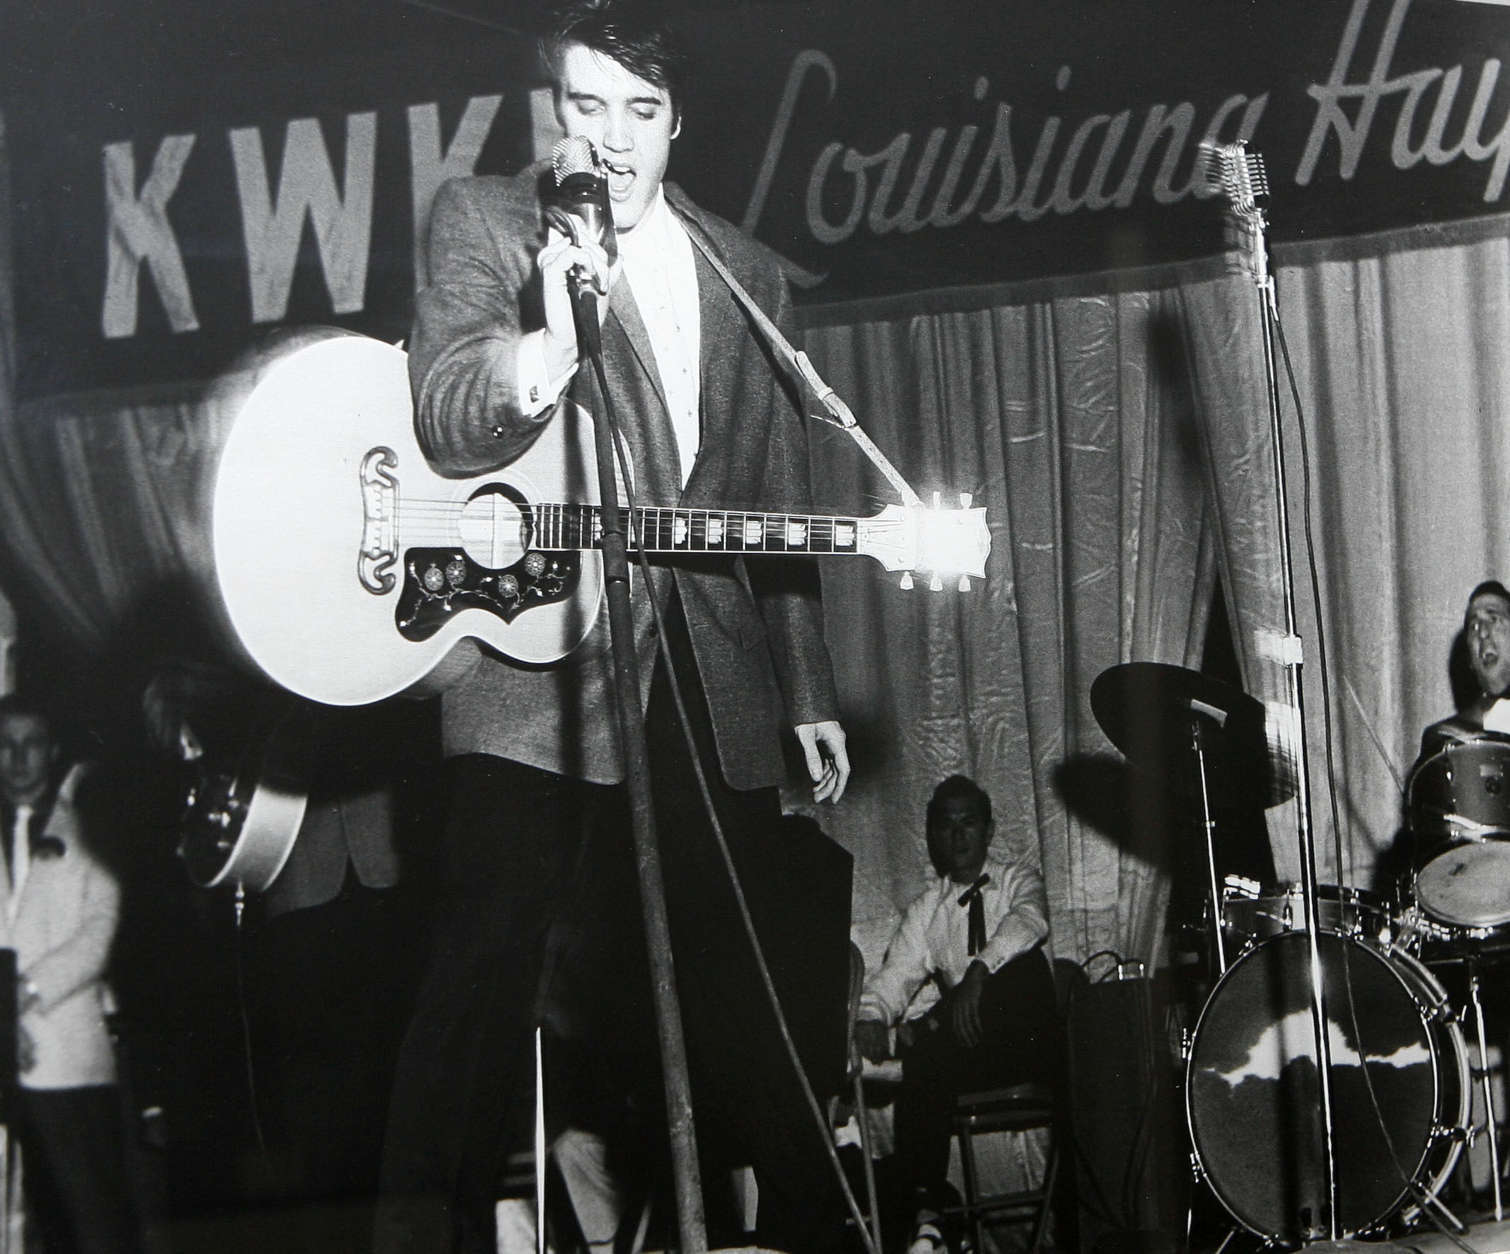 A new exhibit is going up at Masur Museum in Monroe, La., features photographs of a young Elvis Presley on the stage of the Louisiana Hayride in Shreveport, La.  The show focuses on 40 black and white photographs taken by Shreveport photojournalists Jack Barham and Langston McEachern, most depicting Elvis in his final performance in Shreveport on Dec. 15, 1956. (AP Photo,file)